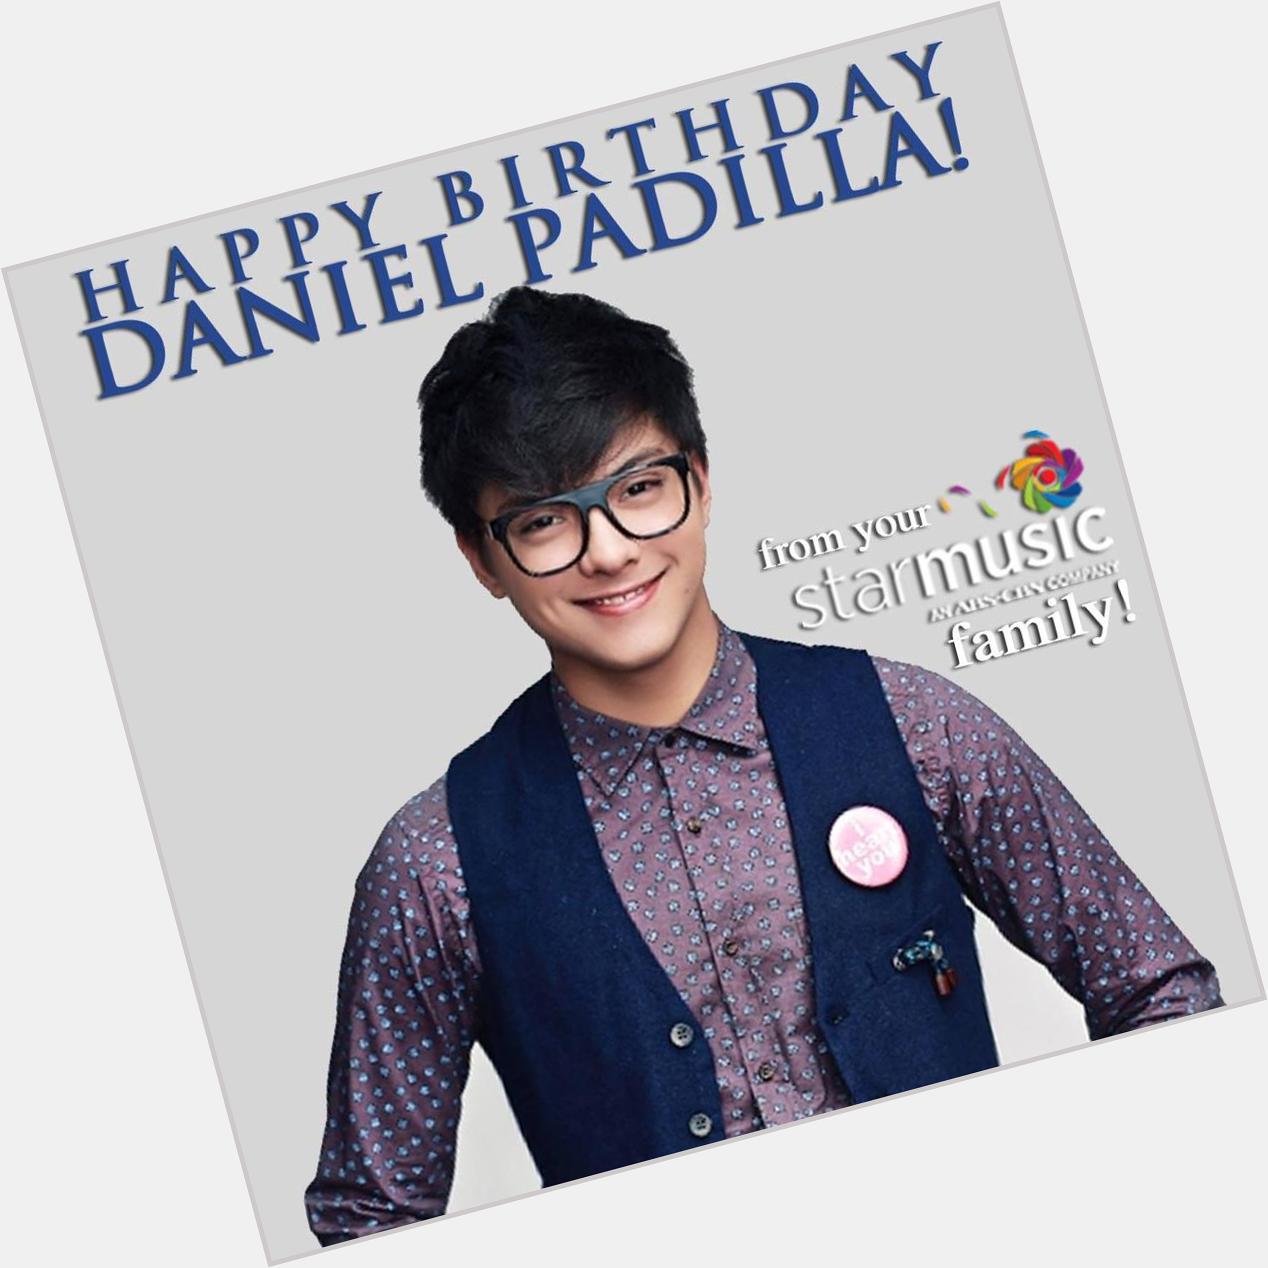 \" Happy Birthday to the TEEN KING Daniel Padilla! From your Star Music Family!  